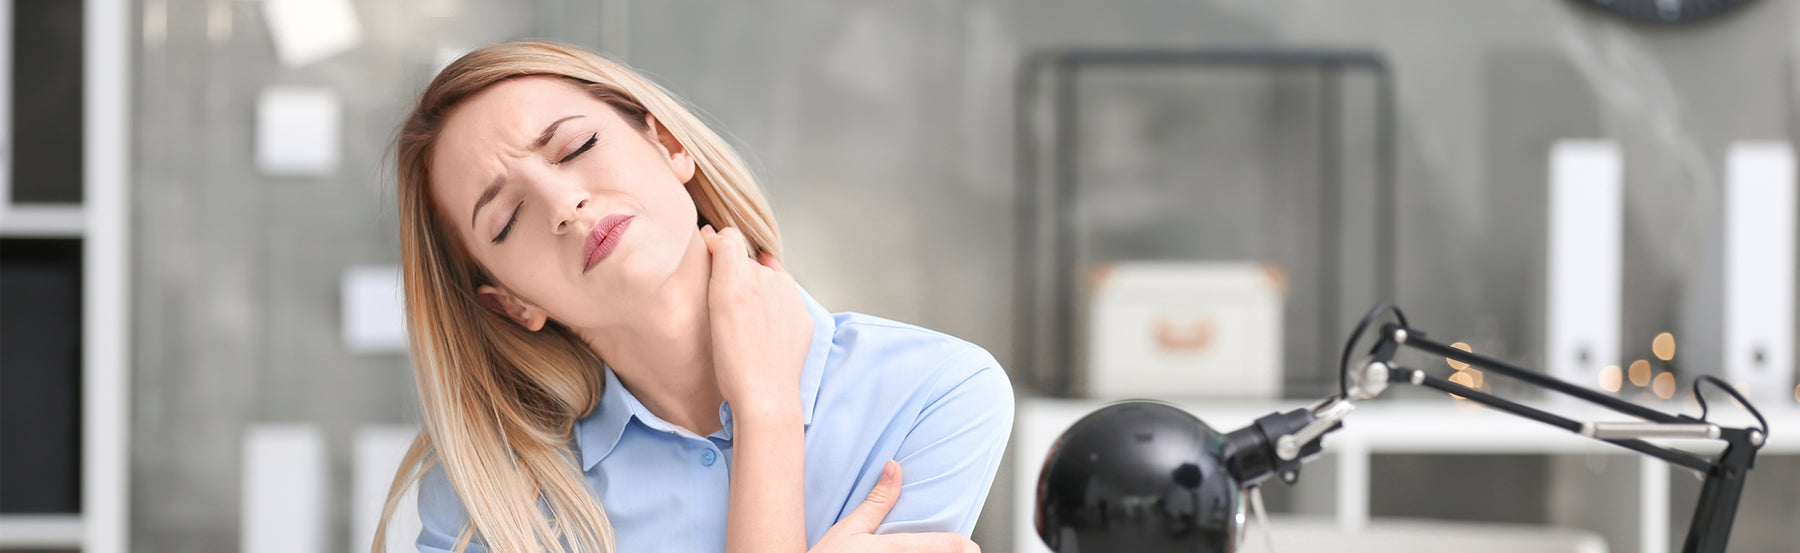 Why Does My Neck Hurt? Types of Neck Pain and Their Causes